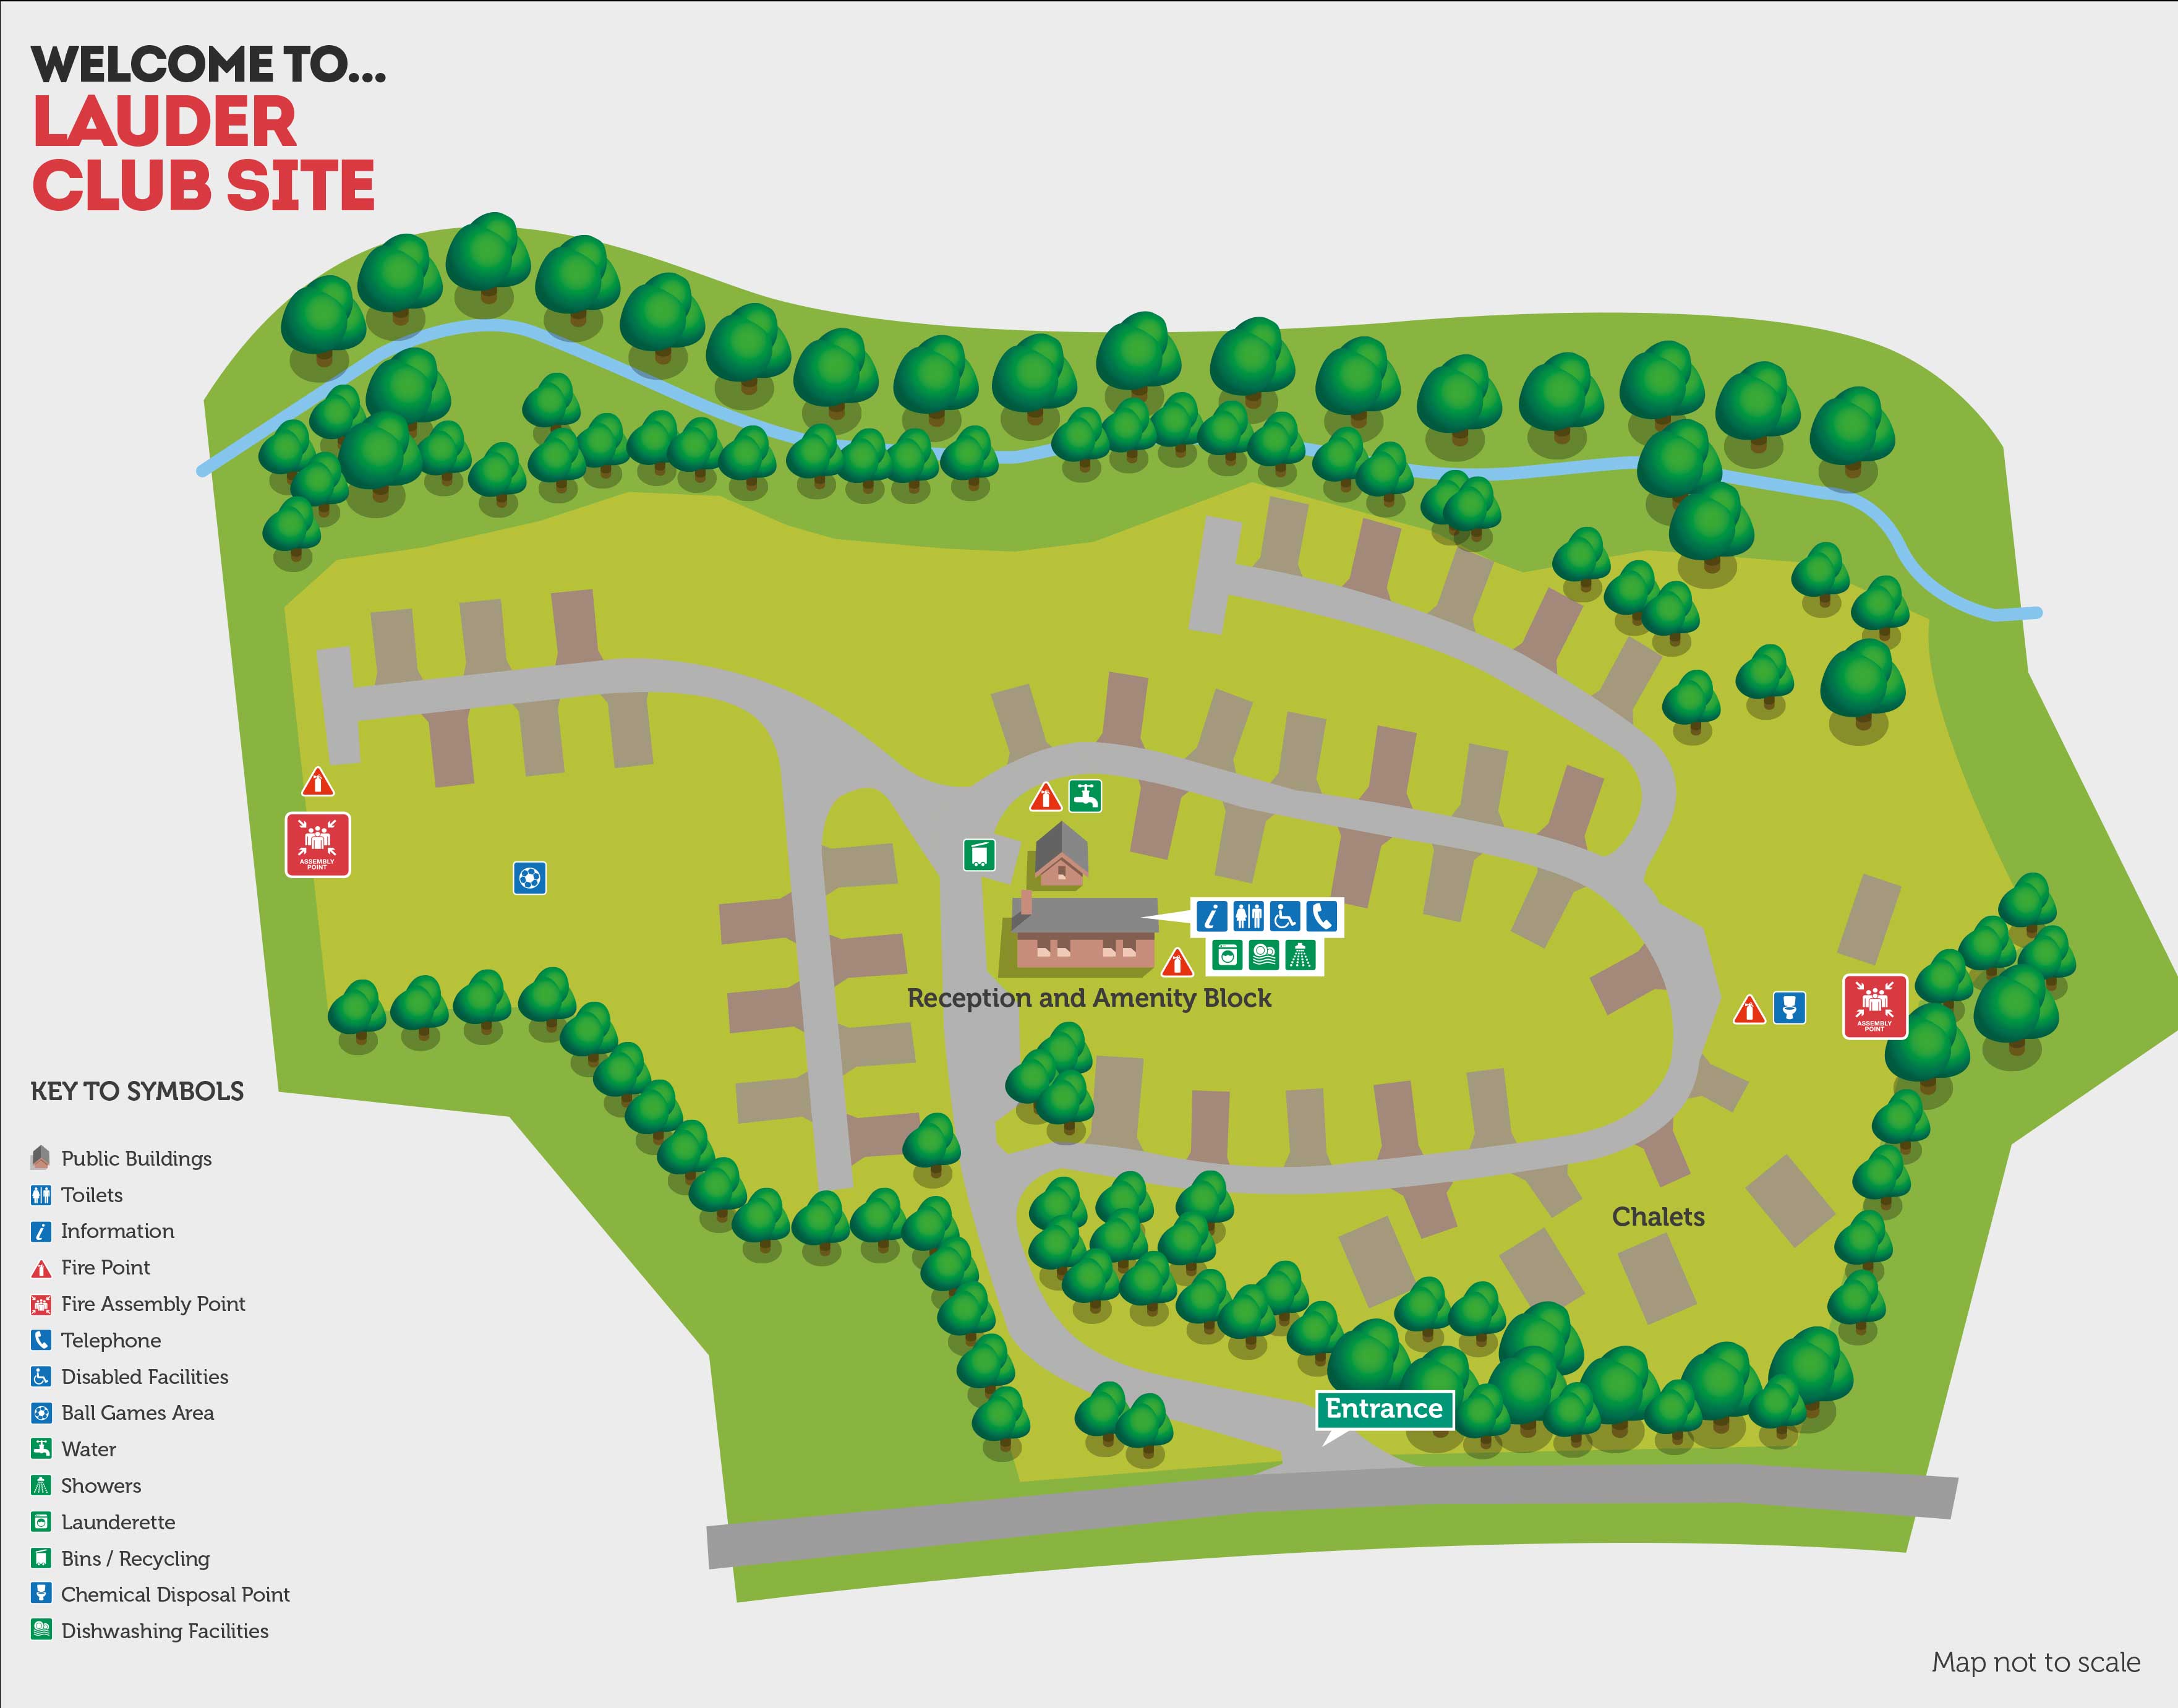 Lauder Camping And Caravanning Club Site